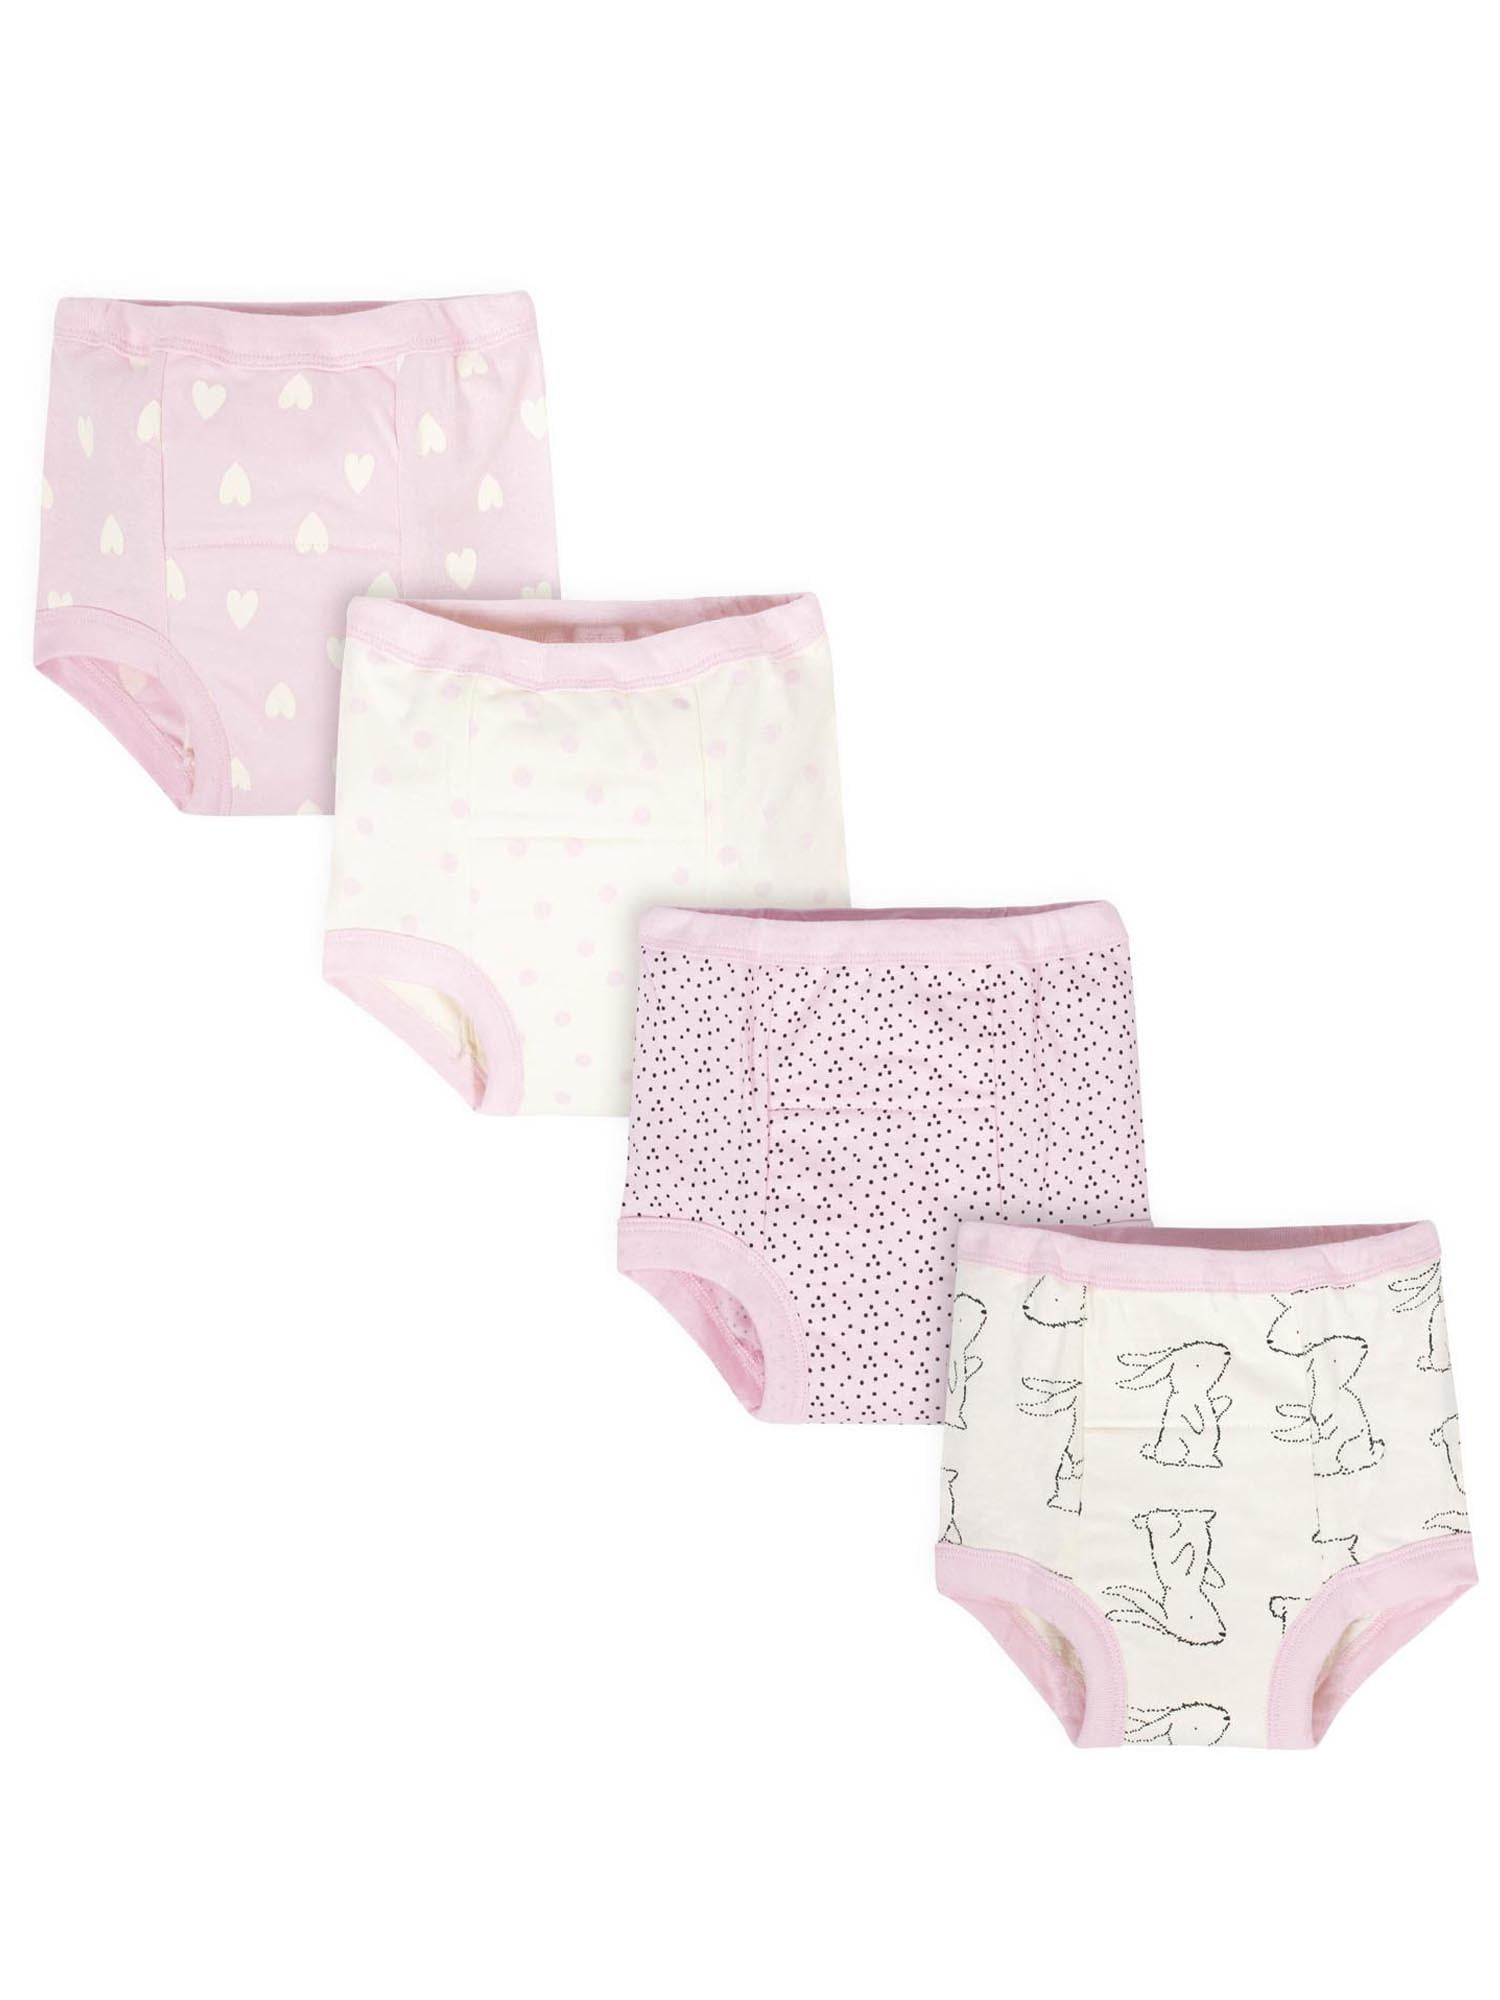 Toddler baby training underwear panties Underpants infant girl clothes FBB